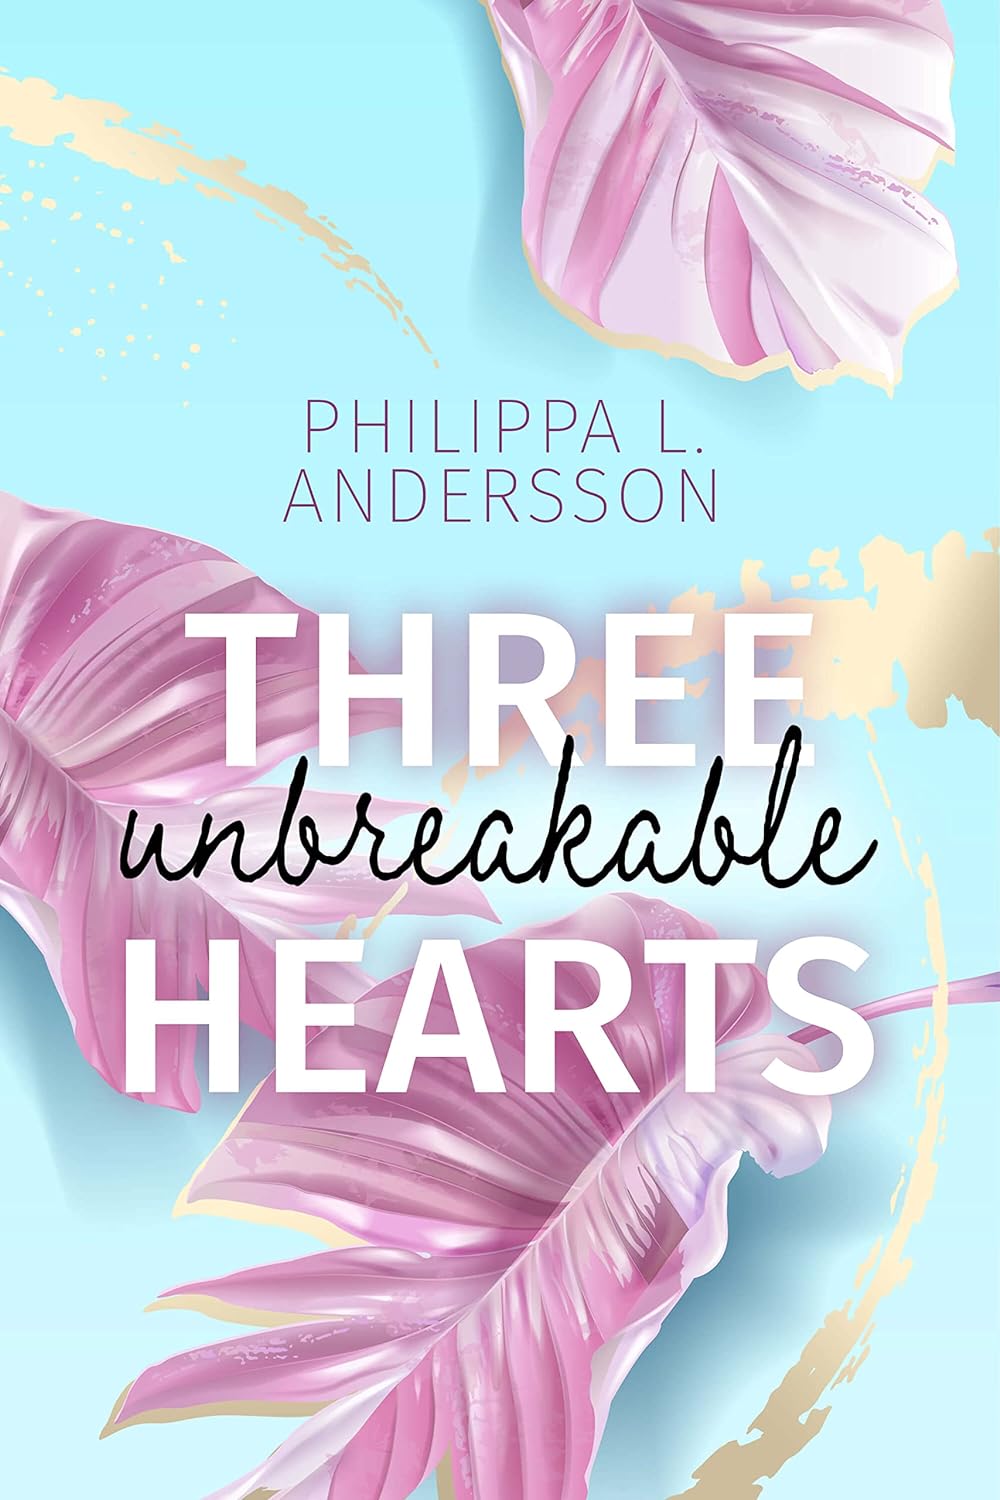 Philippa L Andersson Three unbreakable Hearts